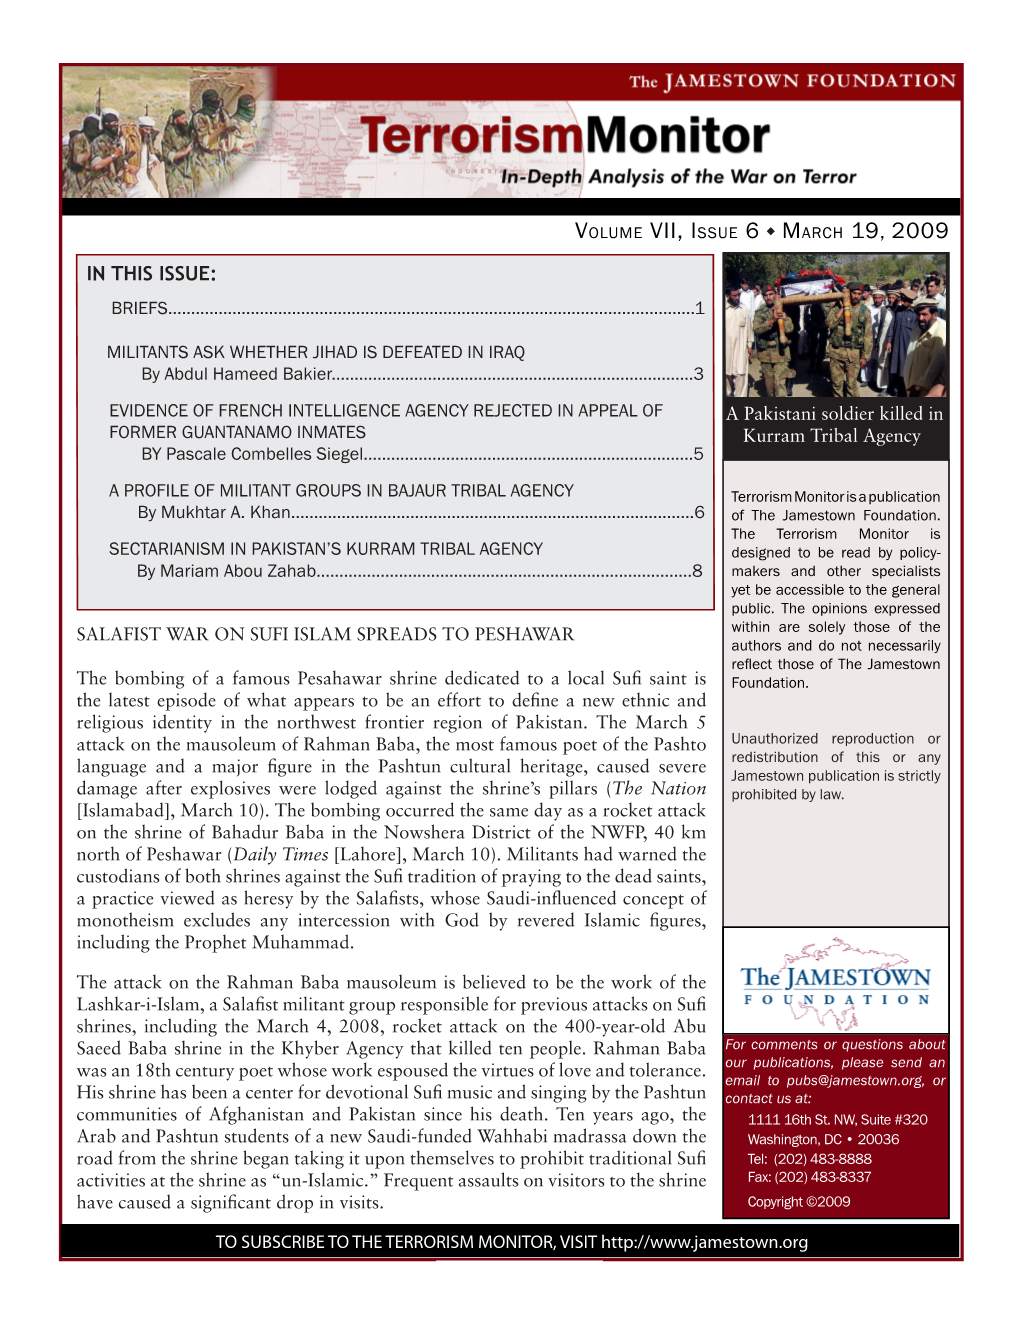 A PROFILE of MILITANT GROUPS in BAJAUR TRIBAL AGENCY Terrorism Monitor Is a Publication by Mukhtar A